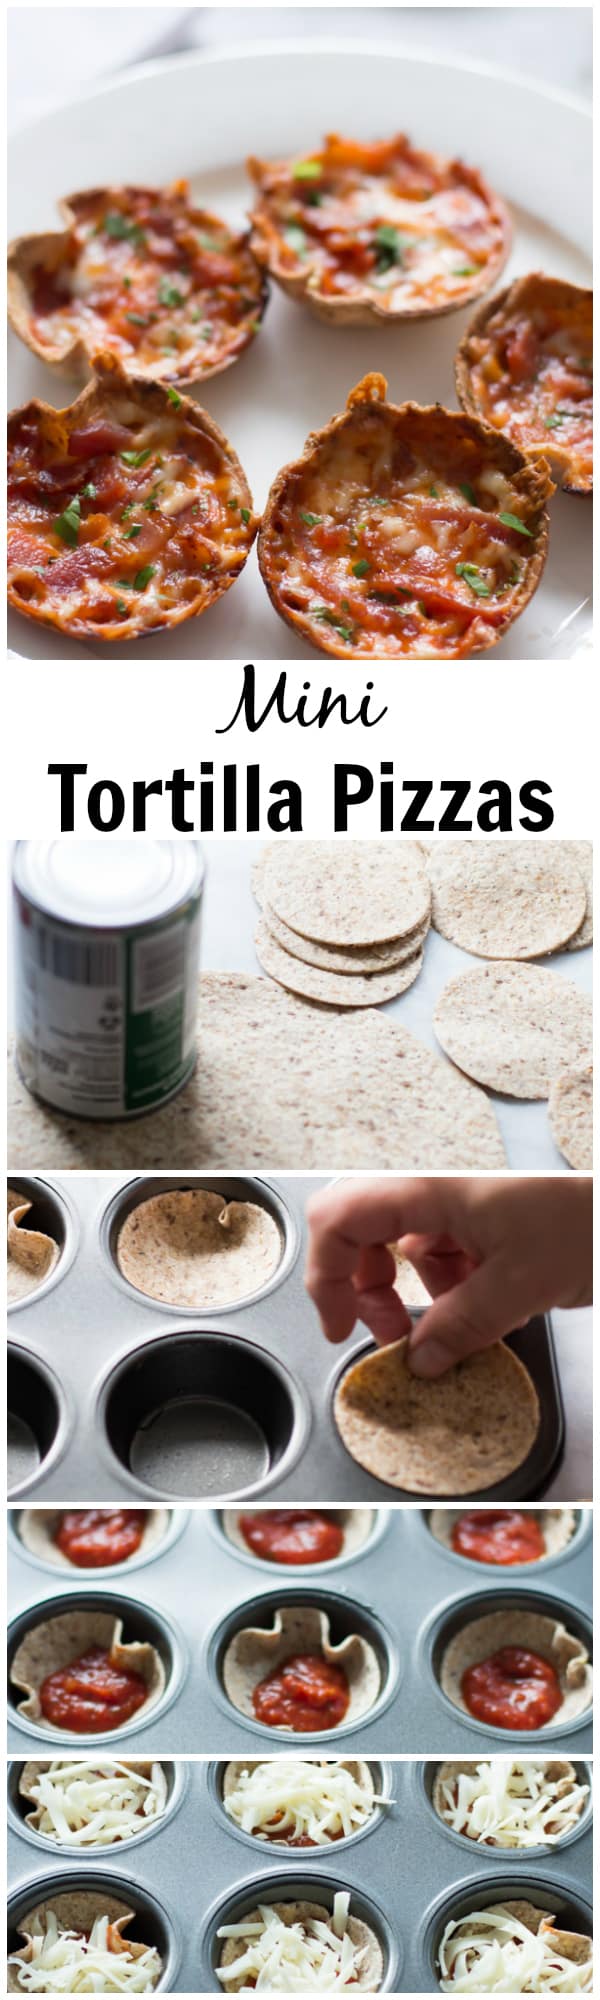 This easy and quick Mini Tortilla Pizzas recipe is delicious and just need 5 ingredients! You and your family will love it! Enjoy!